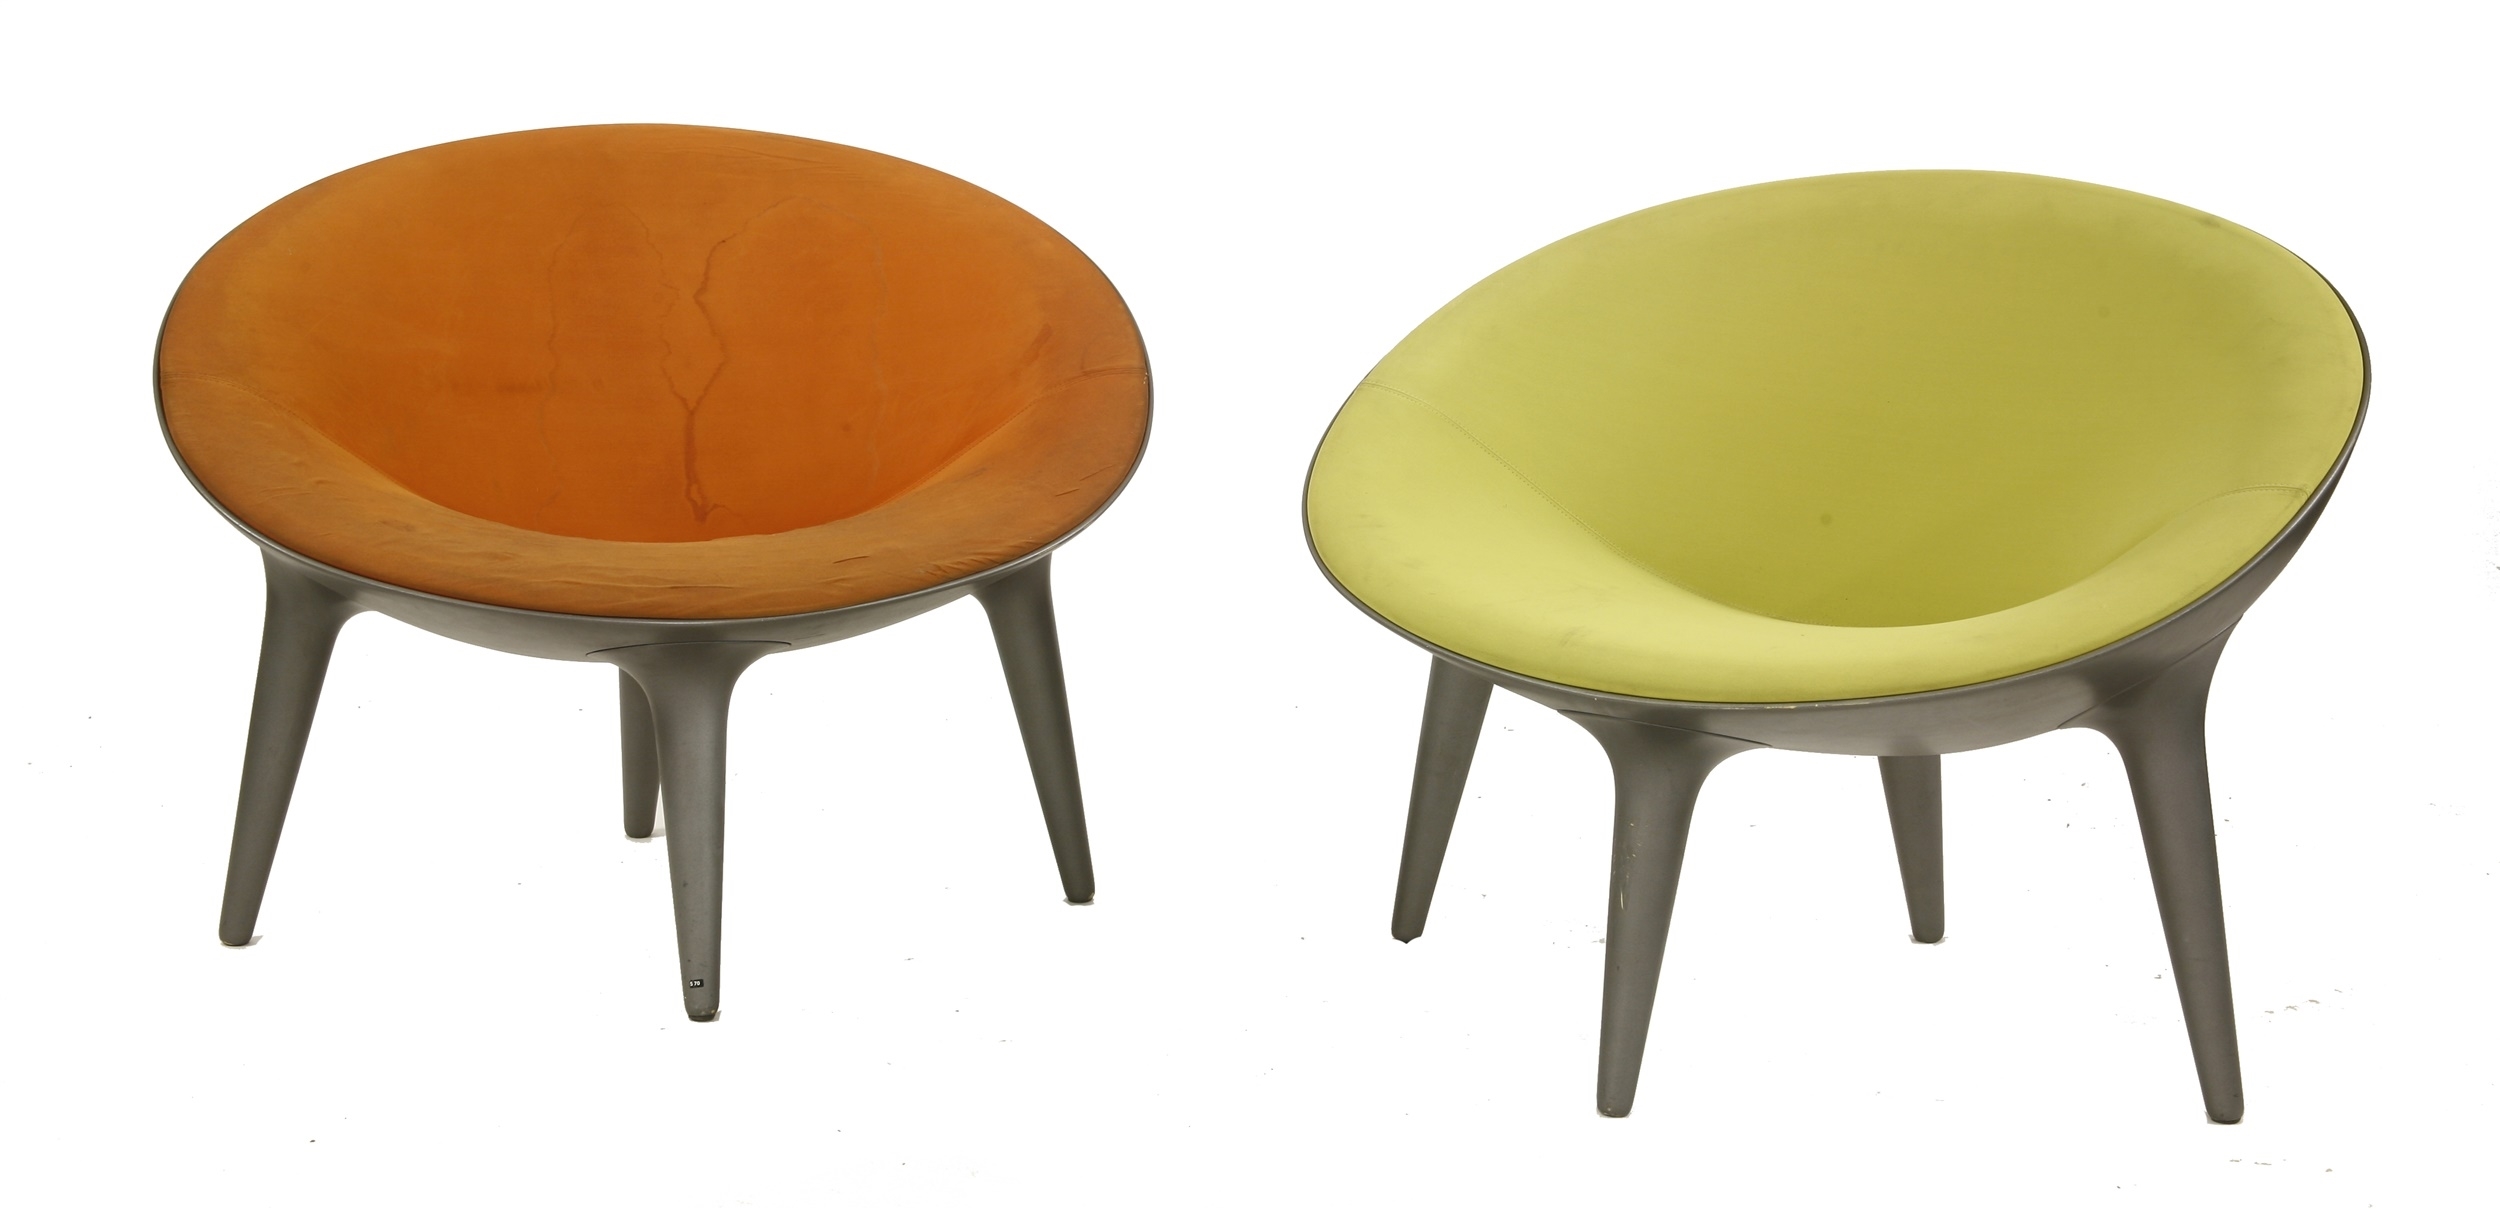 Artwork by Philippe Starck, 2 Works; Strange Things chairs, Made of with green and orange upholstery